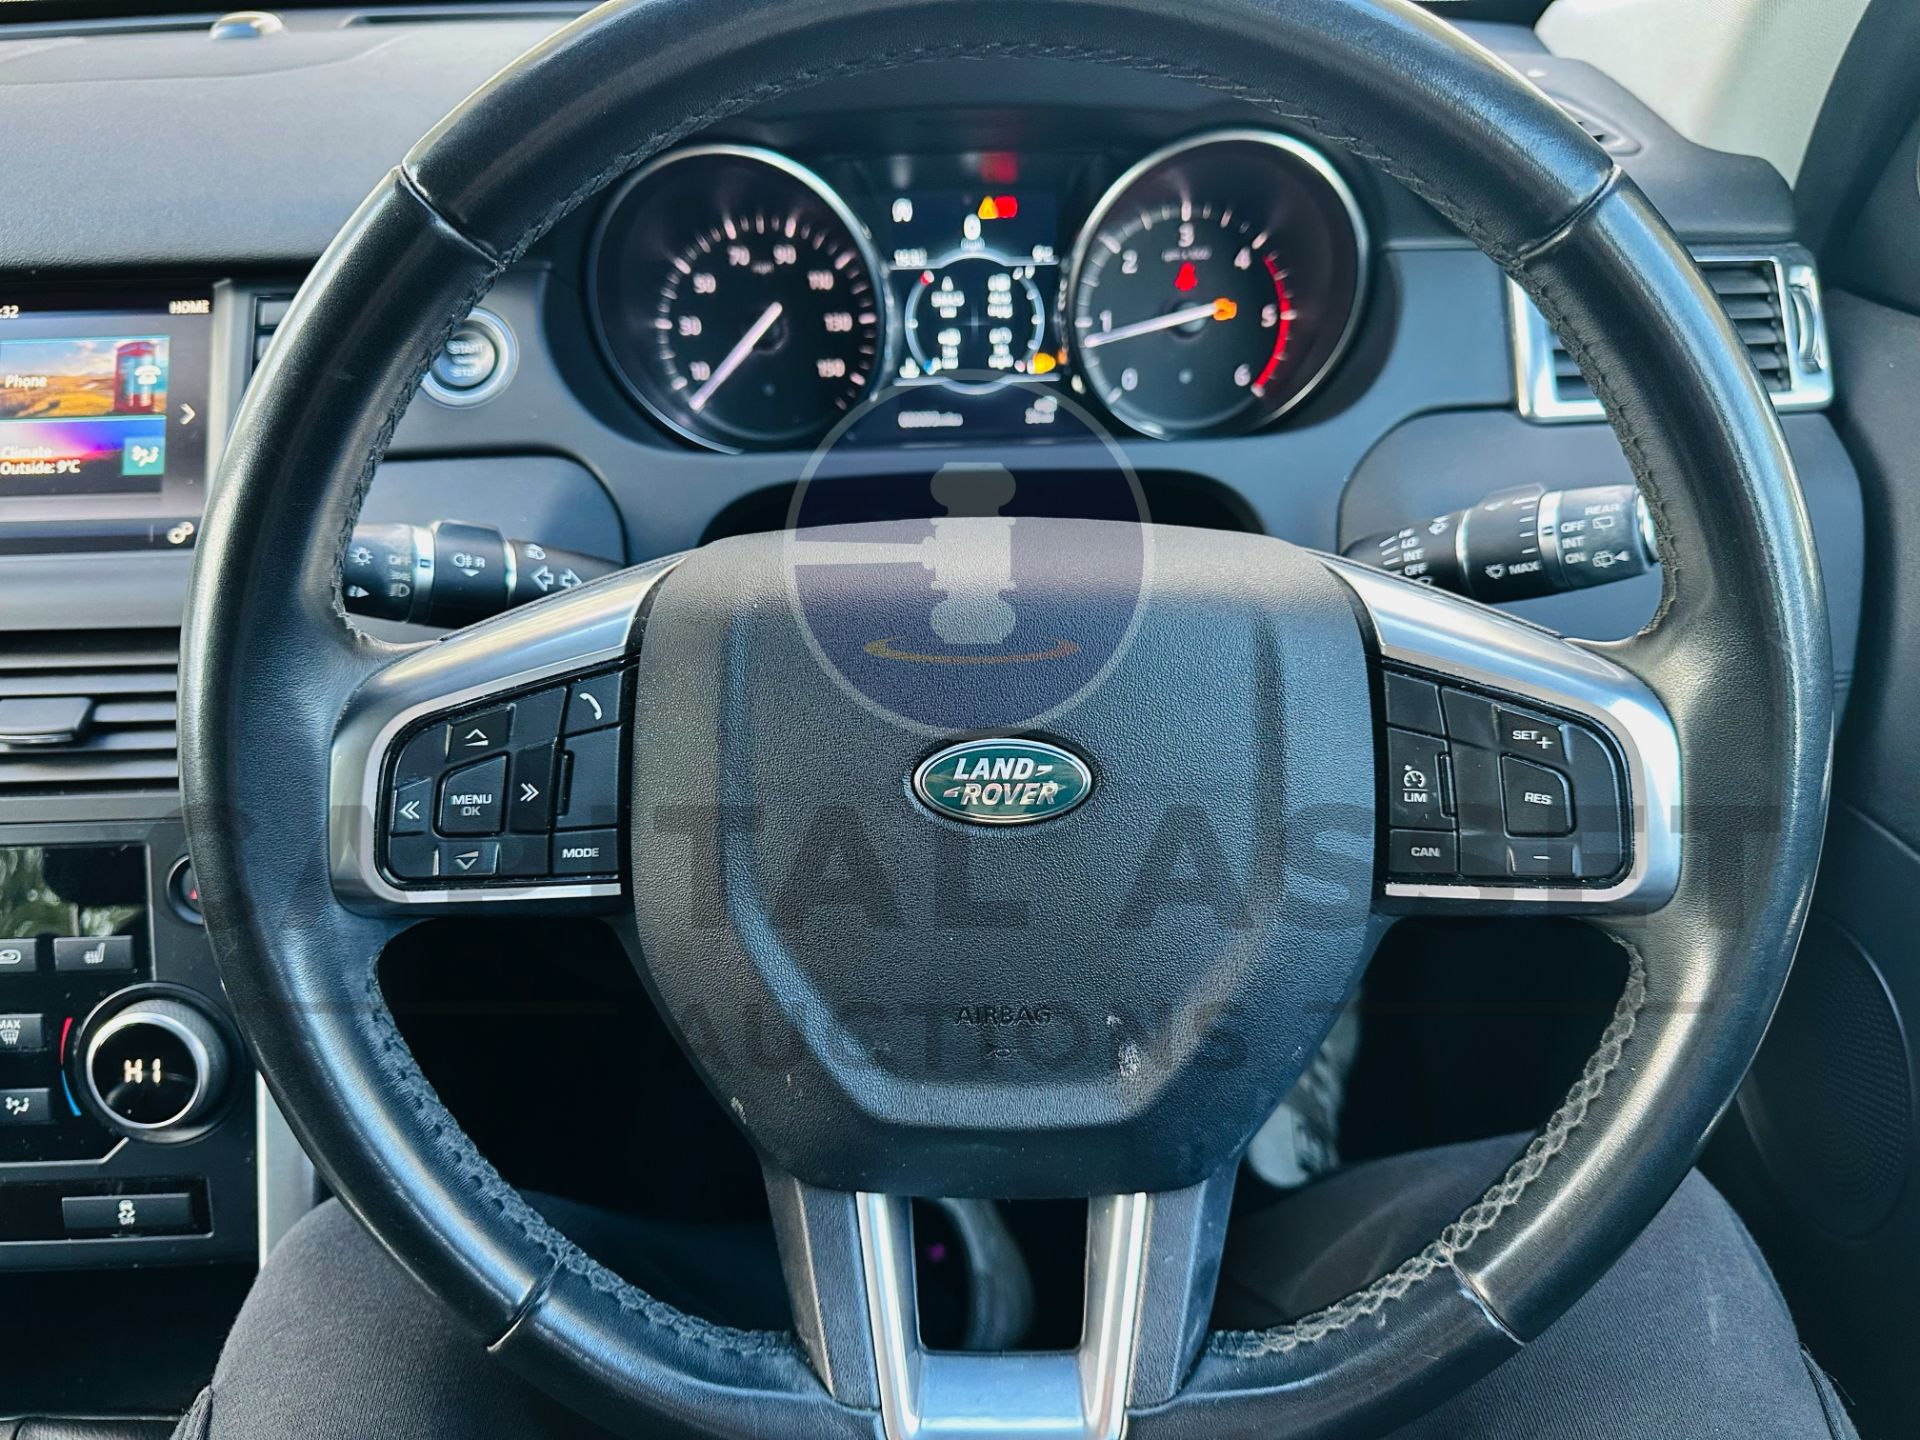 (On Sale) LAND ROVER DISCOVERY SPORT *SE* 5 DOOR SUV (2019 - EURO 6) 2.0 ED4 - AUTO STOP/START - Image 35 of 38